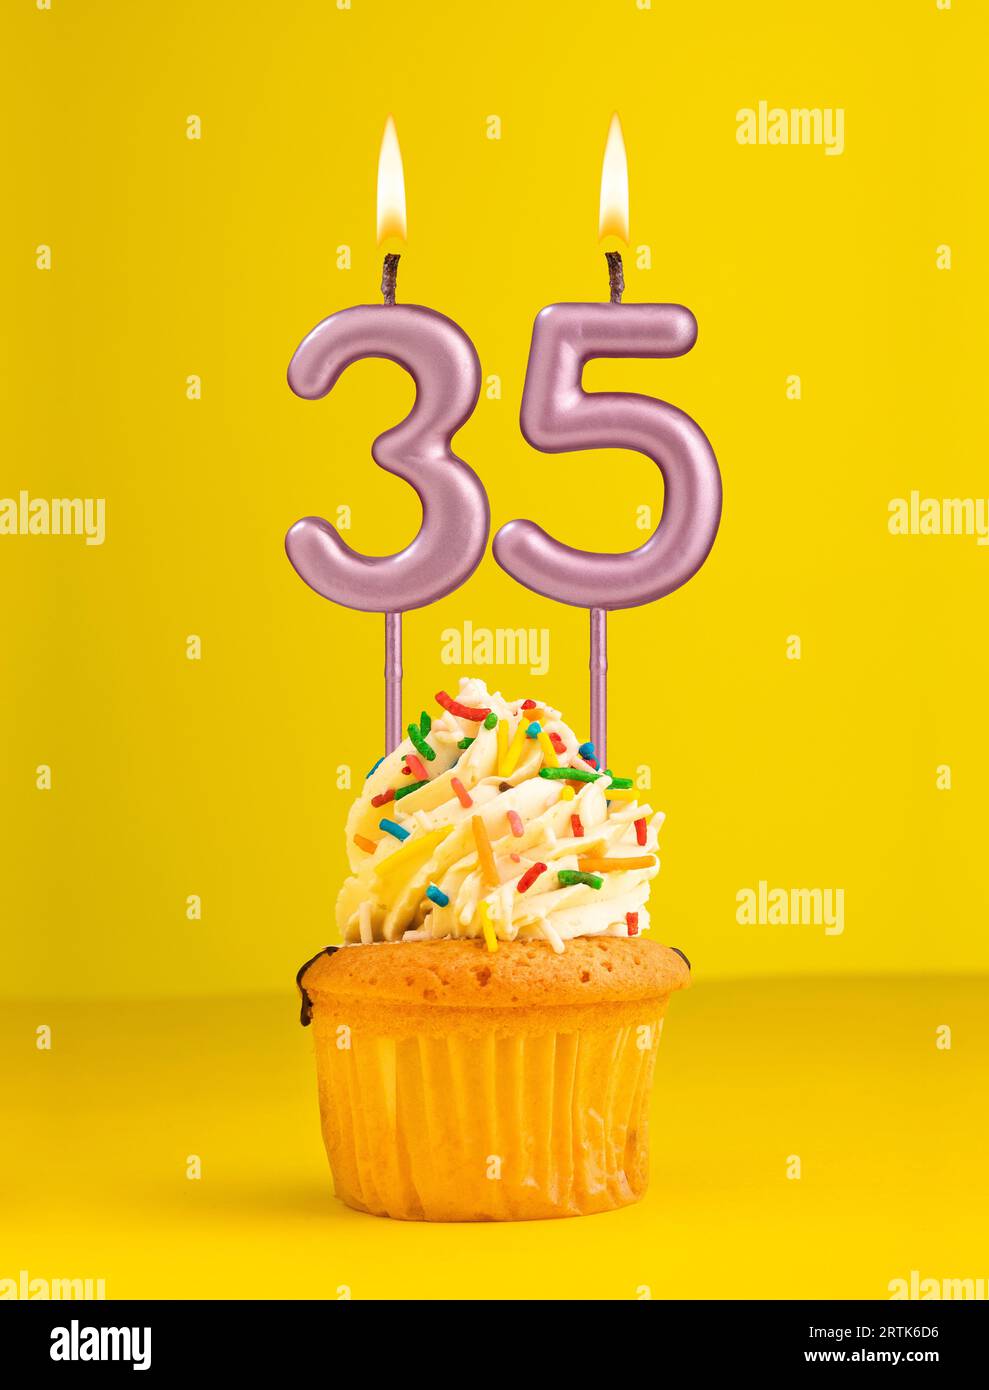 Birthday candle number 35 - Invitation card with yellow background ...